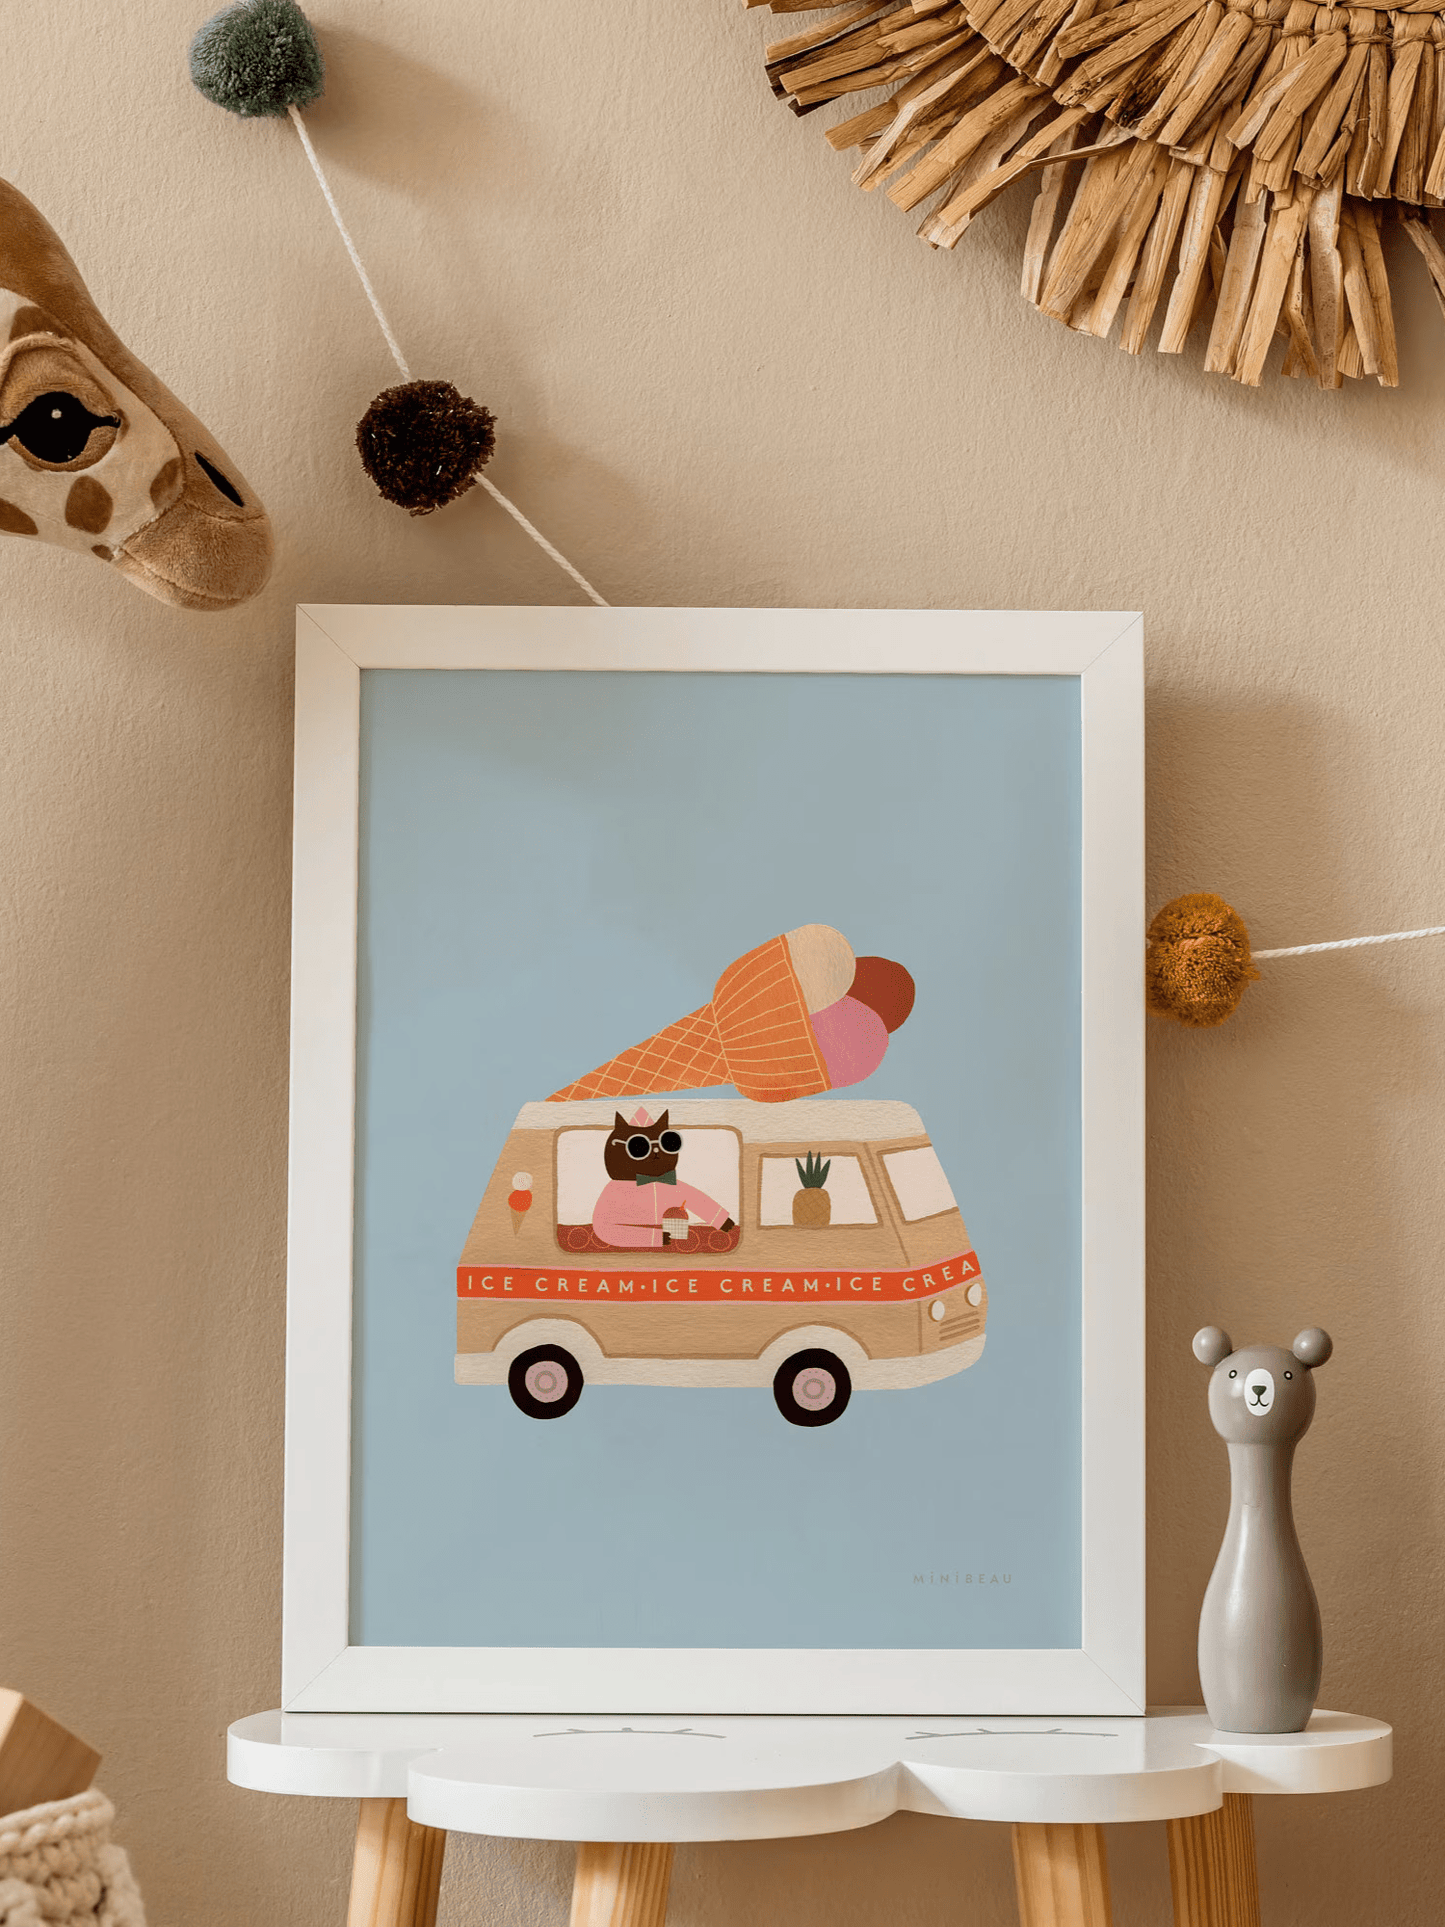 A cloud shaped side table with our Ice cream van art print on it in a white frame. With a stand up soft giraffe head in the top left and pop pom bunting in the top right. Our Ice Cream Van Art Print shows a beige ice cream van with a red stripe with the words ICE CREAM repeated along it and a large ice cream cone with 3 scoops of ice cream, chocolate vanilla and strawberry. Driven by a cool brown cat in pink and a pineapple in the front window, on a light blue background